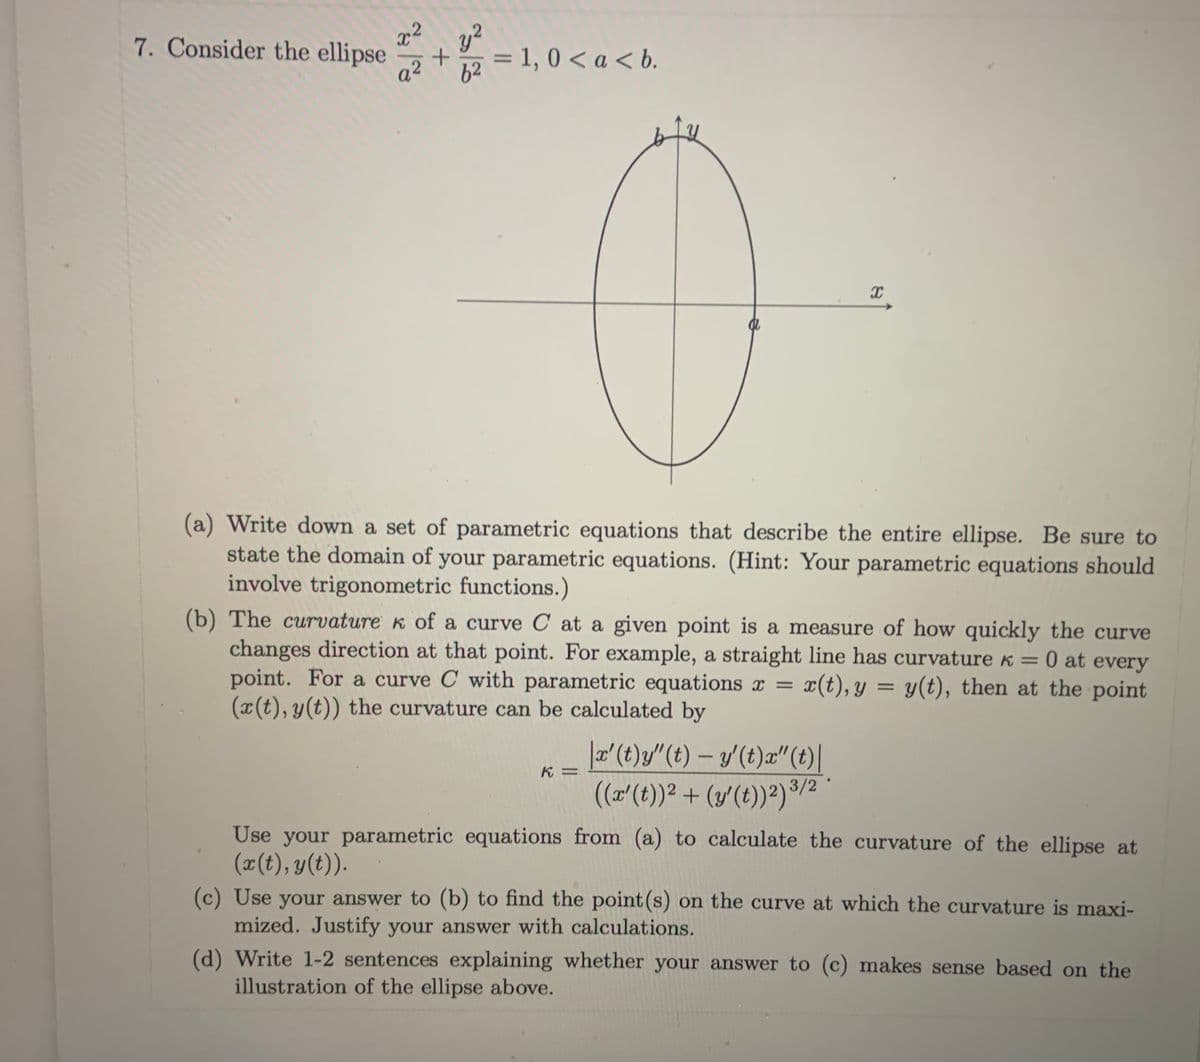 7. Consider the ellipse
y?
= 1, 0 < a < b.
a2
62
(a) Write down a set of parametric equations that describe the entire ellipse. Be sure to
state the domain of your parametric equations. (Hint: Your parametric equations should
involve trigonometric functions.)
(b) The curvature k of a curve C at a given point is a measure of how quickly the curve
changes direction at that point. For example, a straight line has curvature k = 0 at every
point. For a curve C with parametric equations x =
(x(t), y(t)) the curvature can be calculated by
x(t), y = y(t), then at the point
|a'(t)y/"(t) – y (t)a"(t)|
(a'(t)) + (y'(t))²)/2
K =
Use your parametric equations from (a) to calculate the curvature of the ellipse at
(x(t), y(t)).
(c) Use your answer to (b) to find the point (s) on the curve at which the curvature is maxi-
mized. Justify your answer with calculations.
(d) Write 1-2 sentences explaining whether your answer to (c) makes sense based on the
illustration of the ellipse above.
